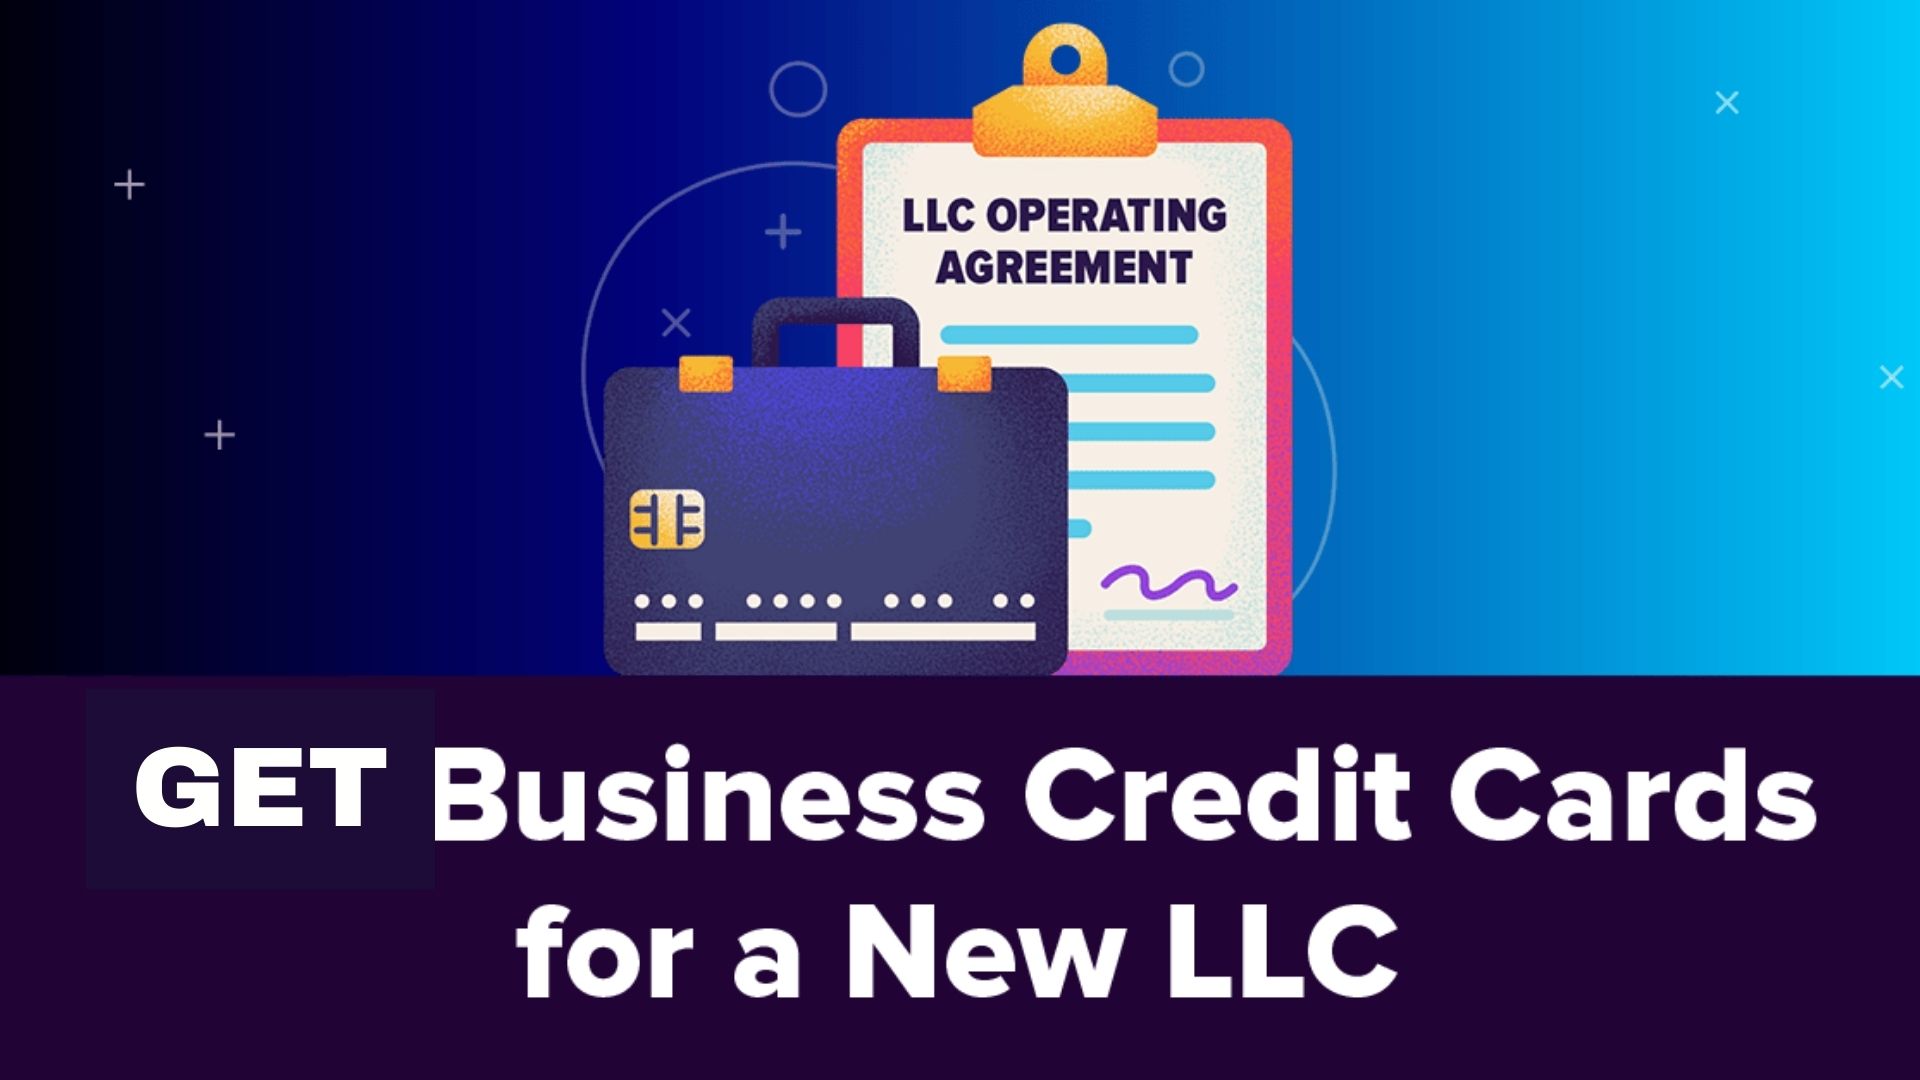 How to Get Business Credit